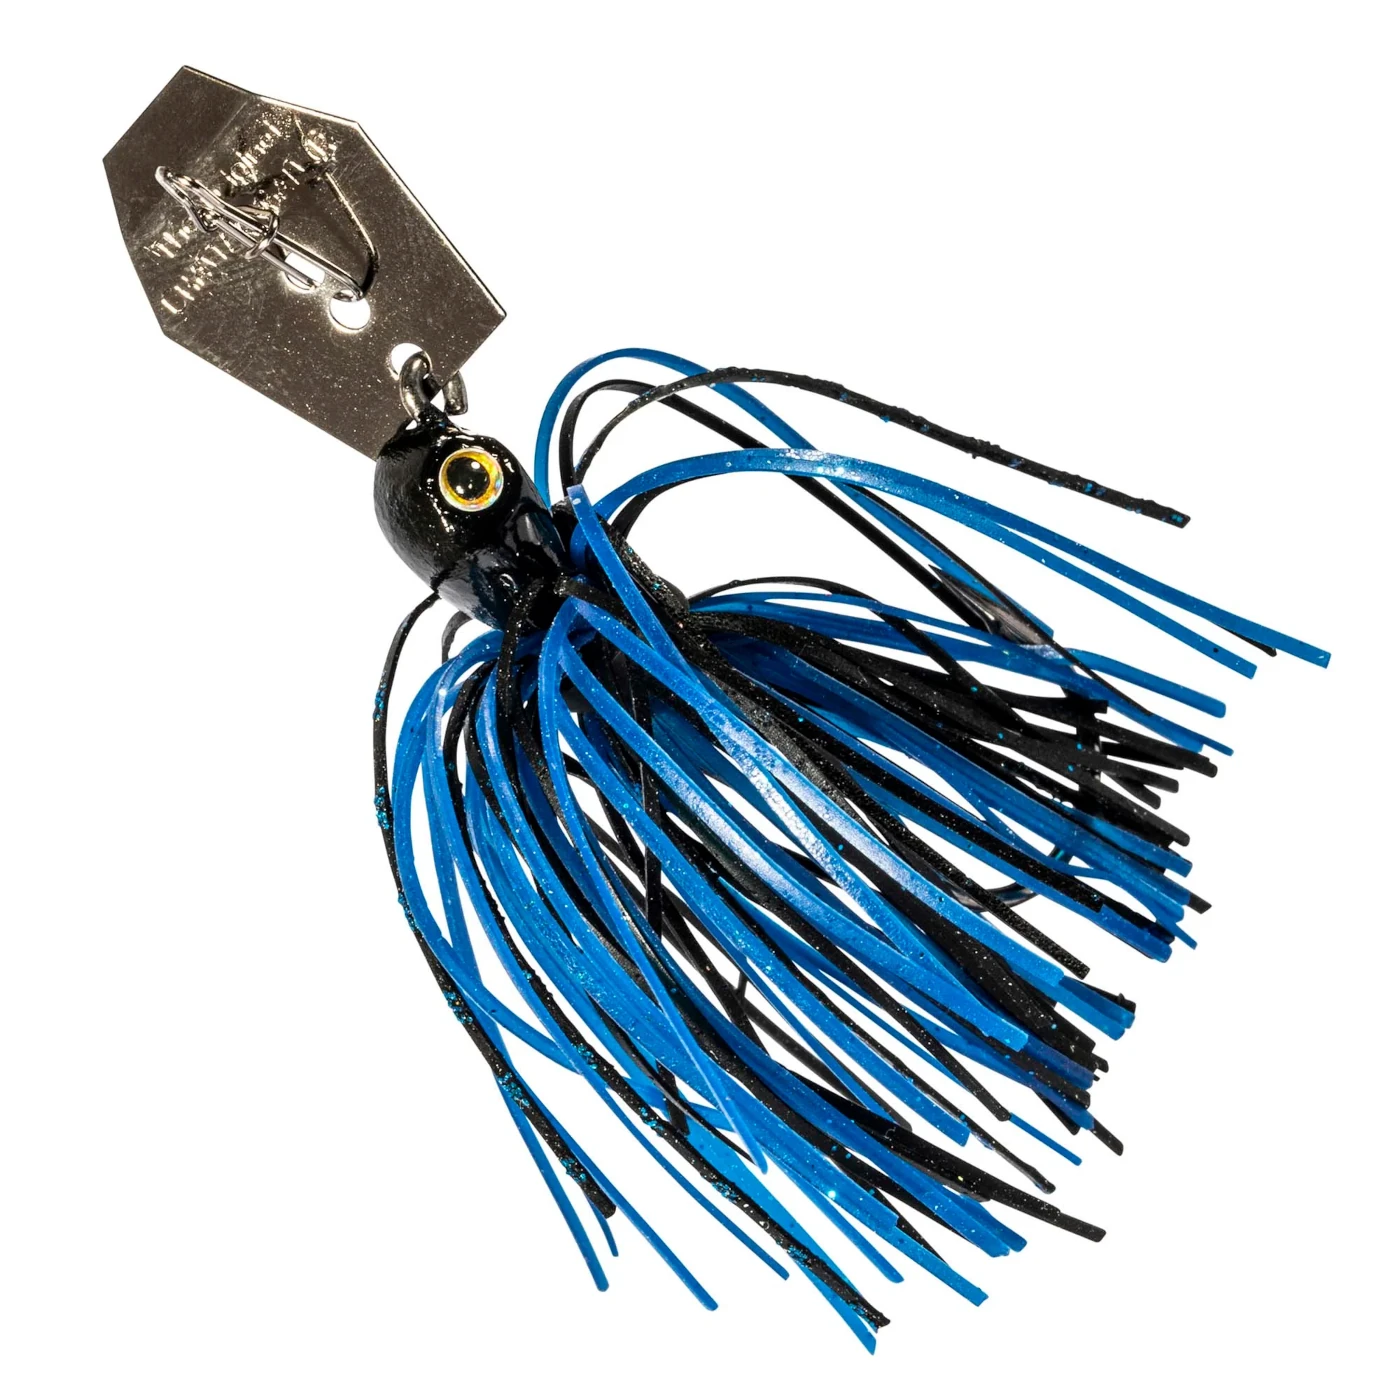 Z-Man ShroomZ Micro Finesse Jigs, Choice of Colors and Sizes